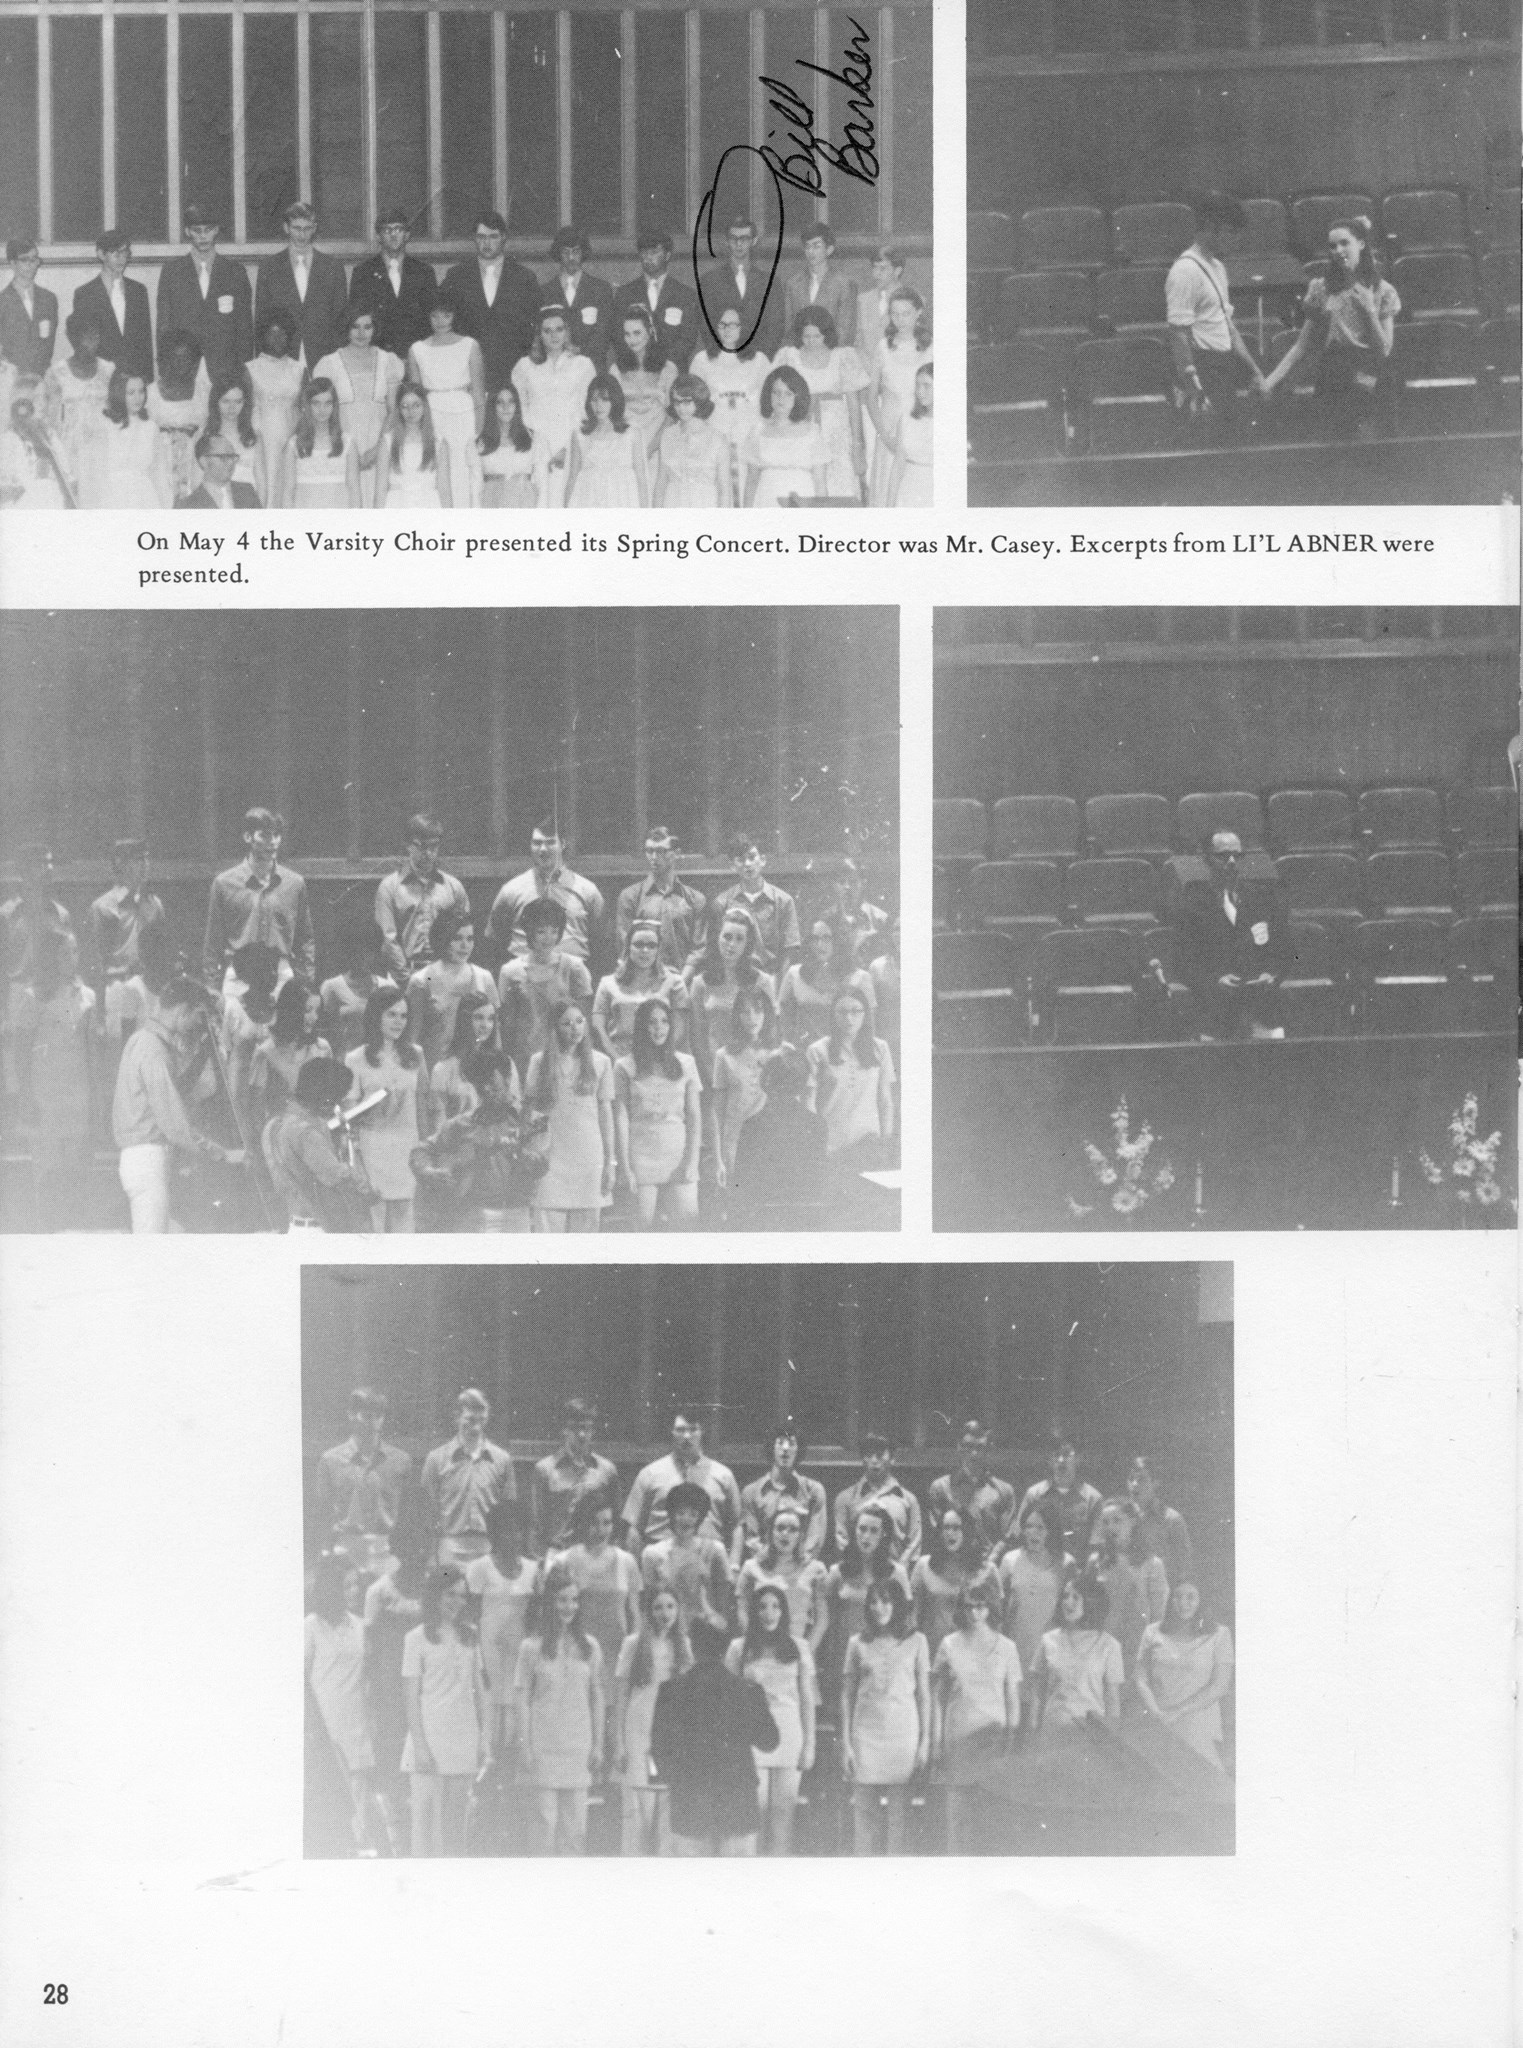 ../../../Images/Large/1971/Arclight-1971-pg0028.jpg